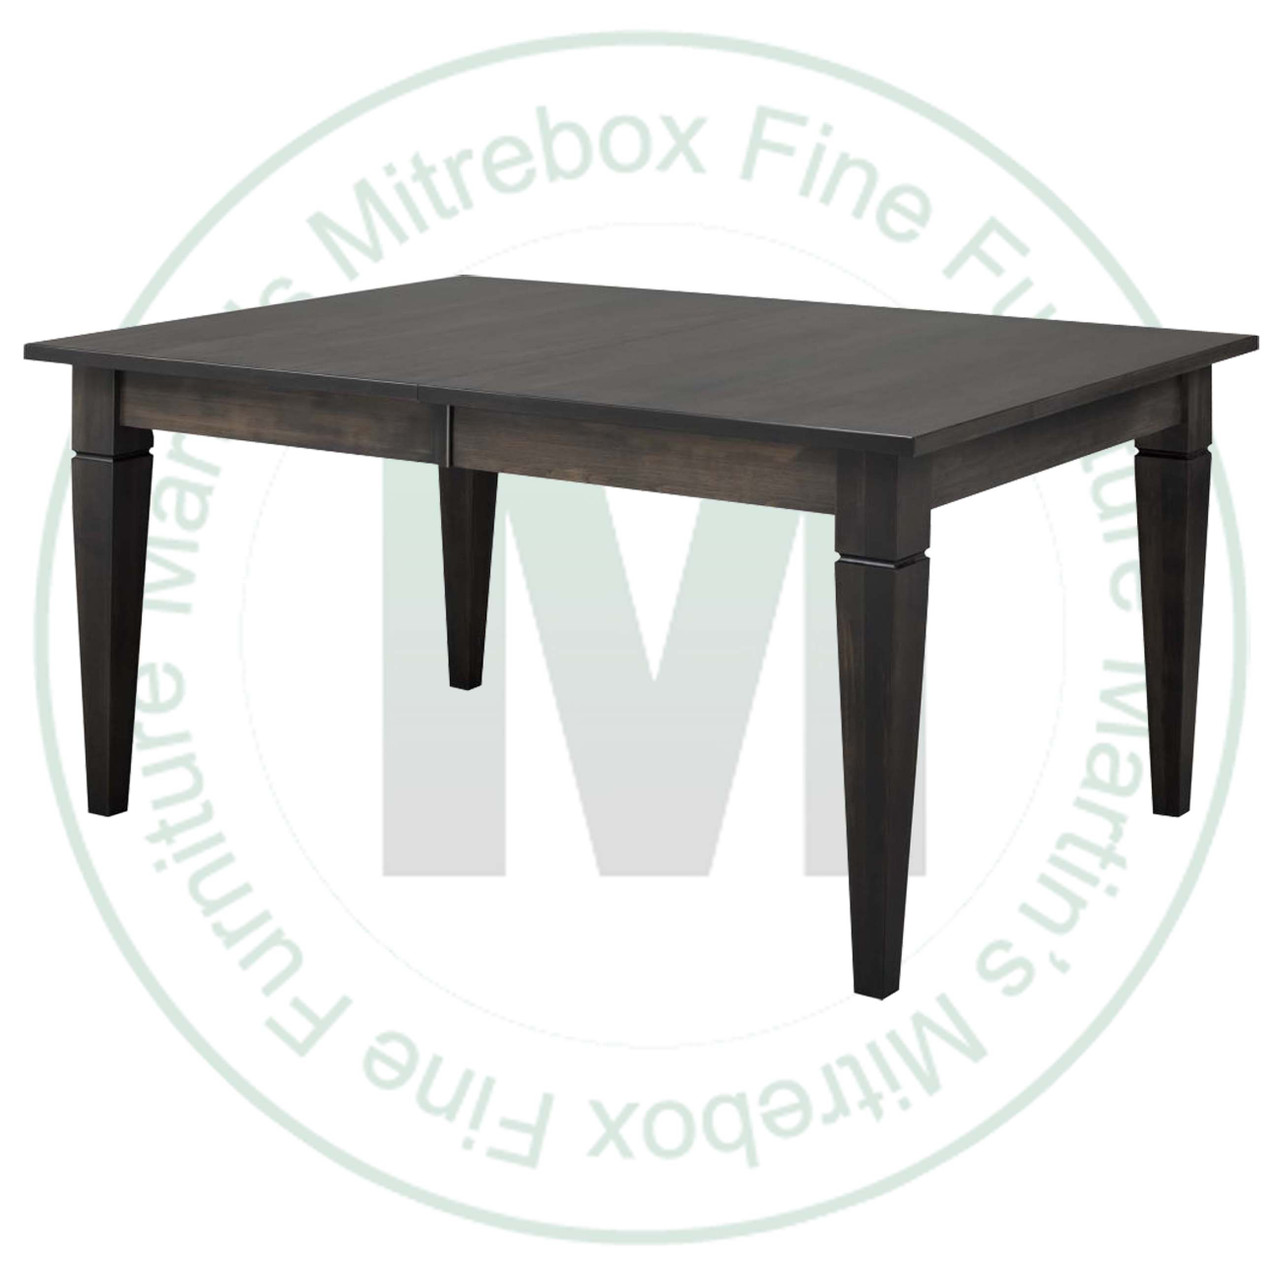 Maple Reesor Extension Harvest Table 42''D x 60''W x 30''H With 2 - 12'' Leaves Table Has 1 3/4'' Thick Top